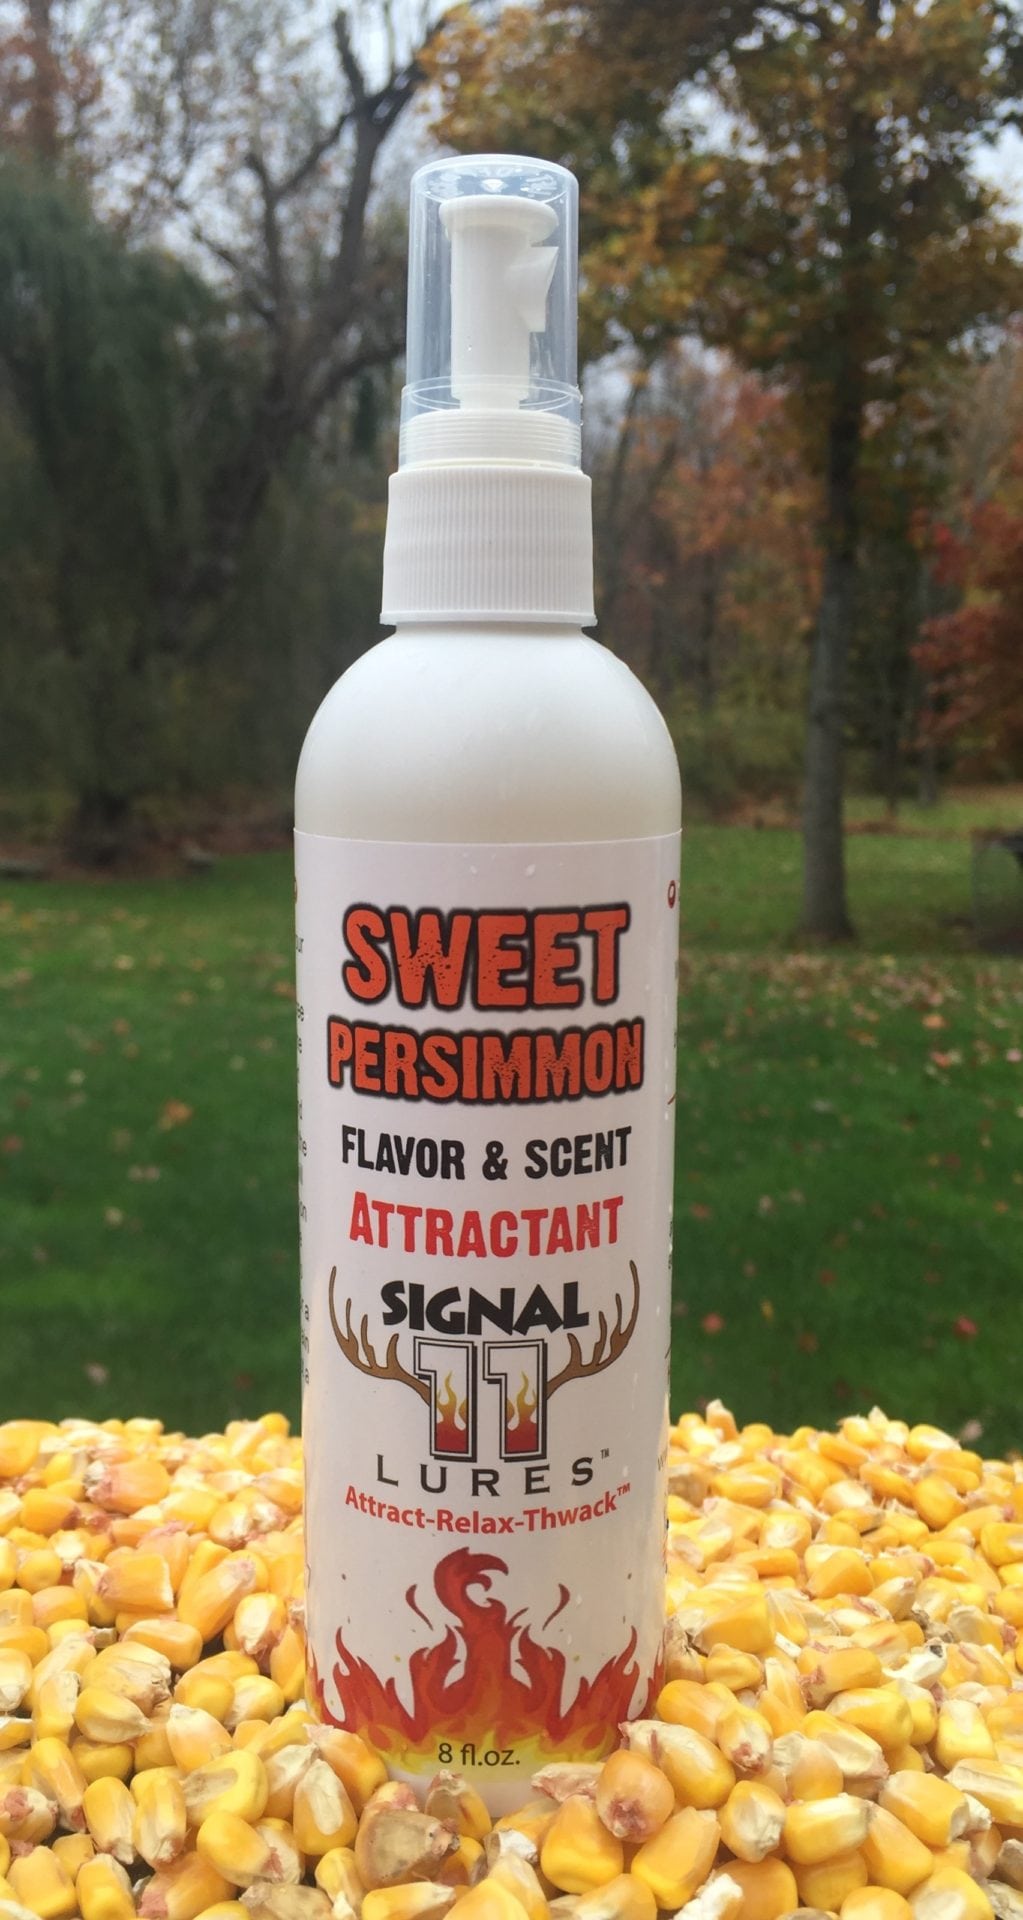 A bottle of sweet persimmon flavor and scent attractant.